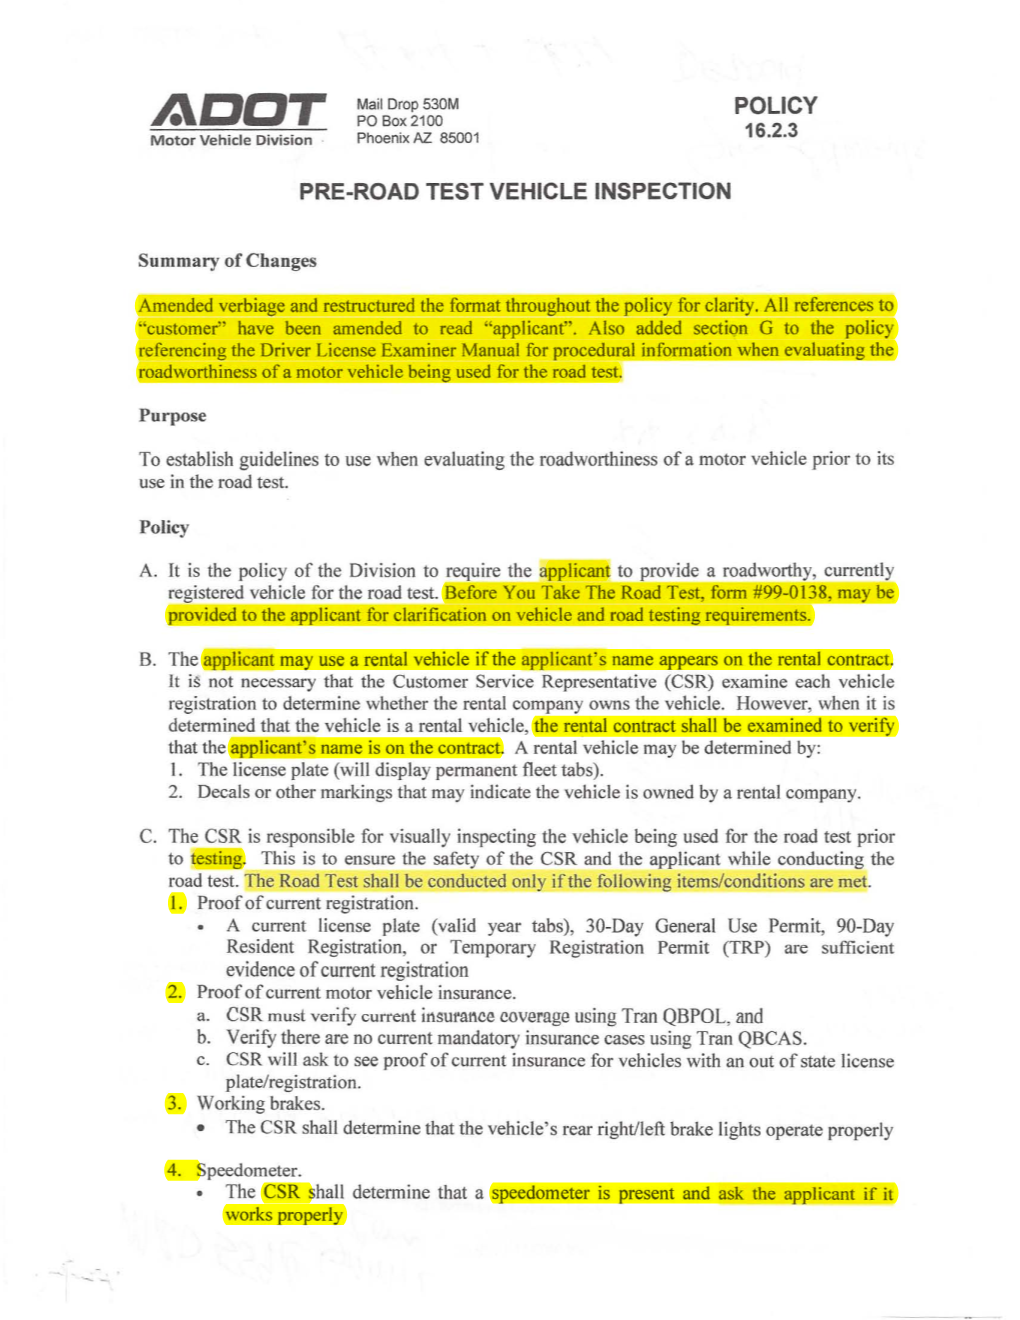 Policy Pre-Road Test Vehicle Inspection